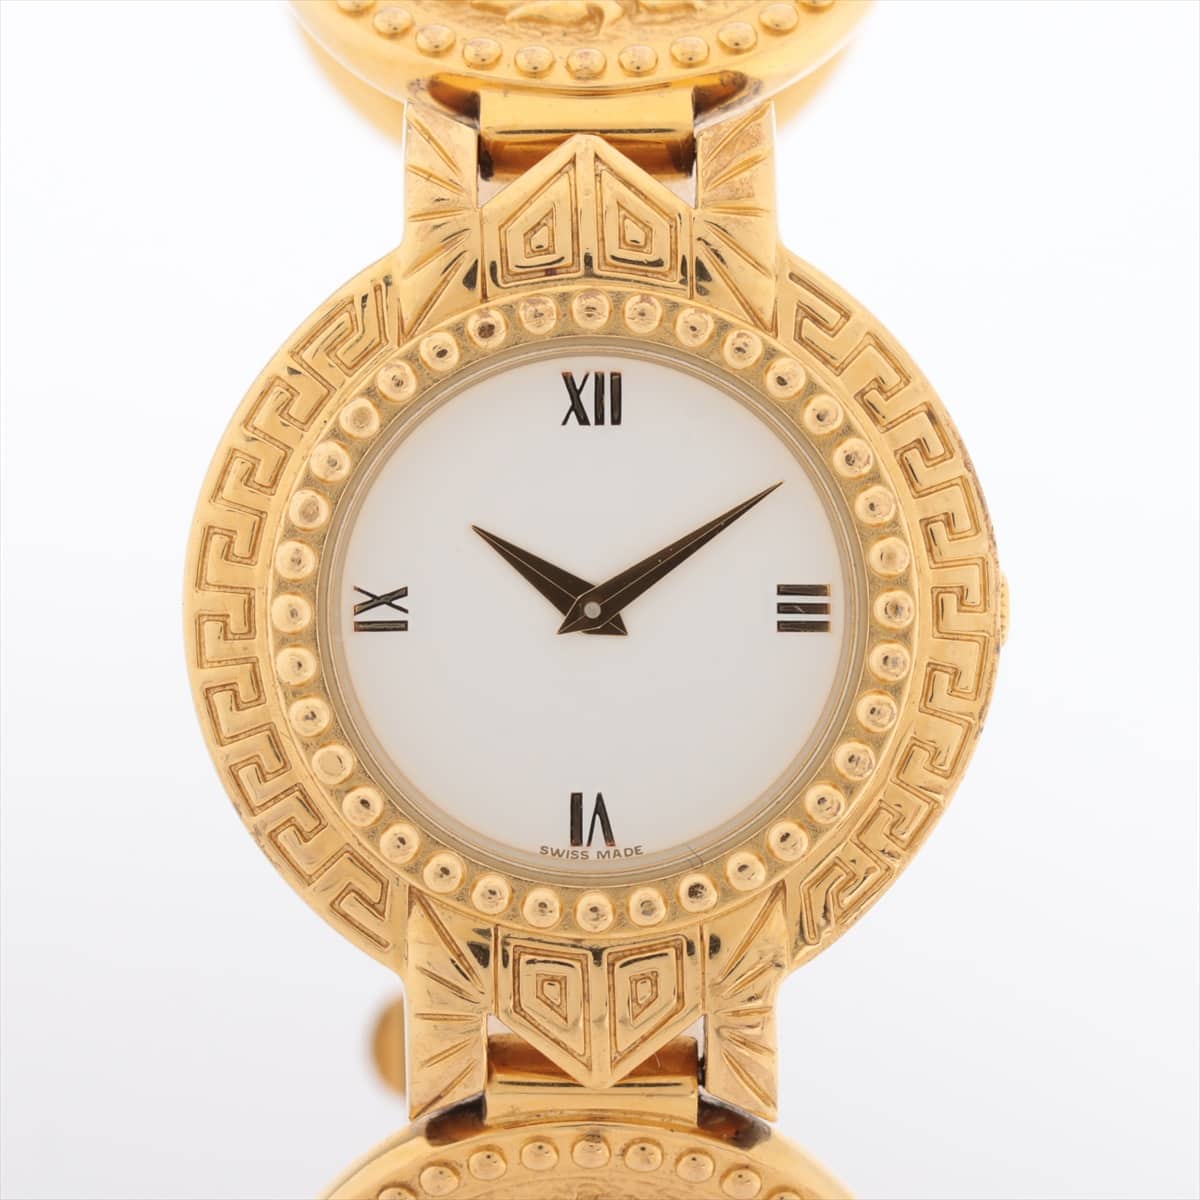 Gianni Versace Coin Watch 7008002 GP QZ White-Face